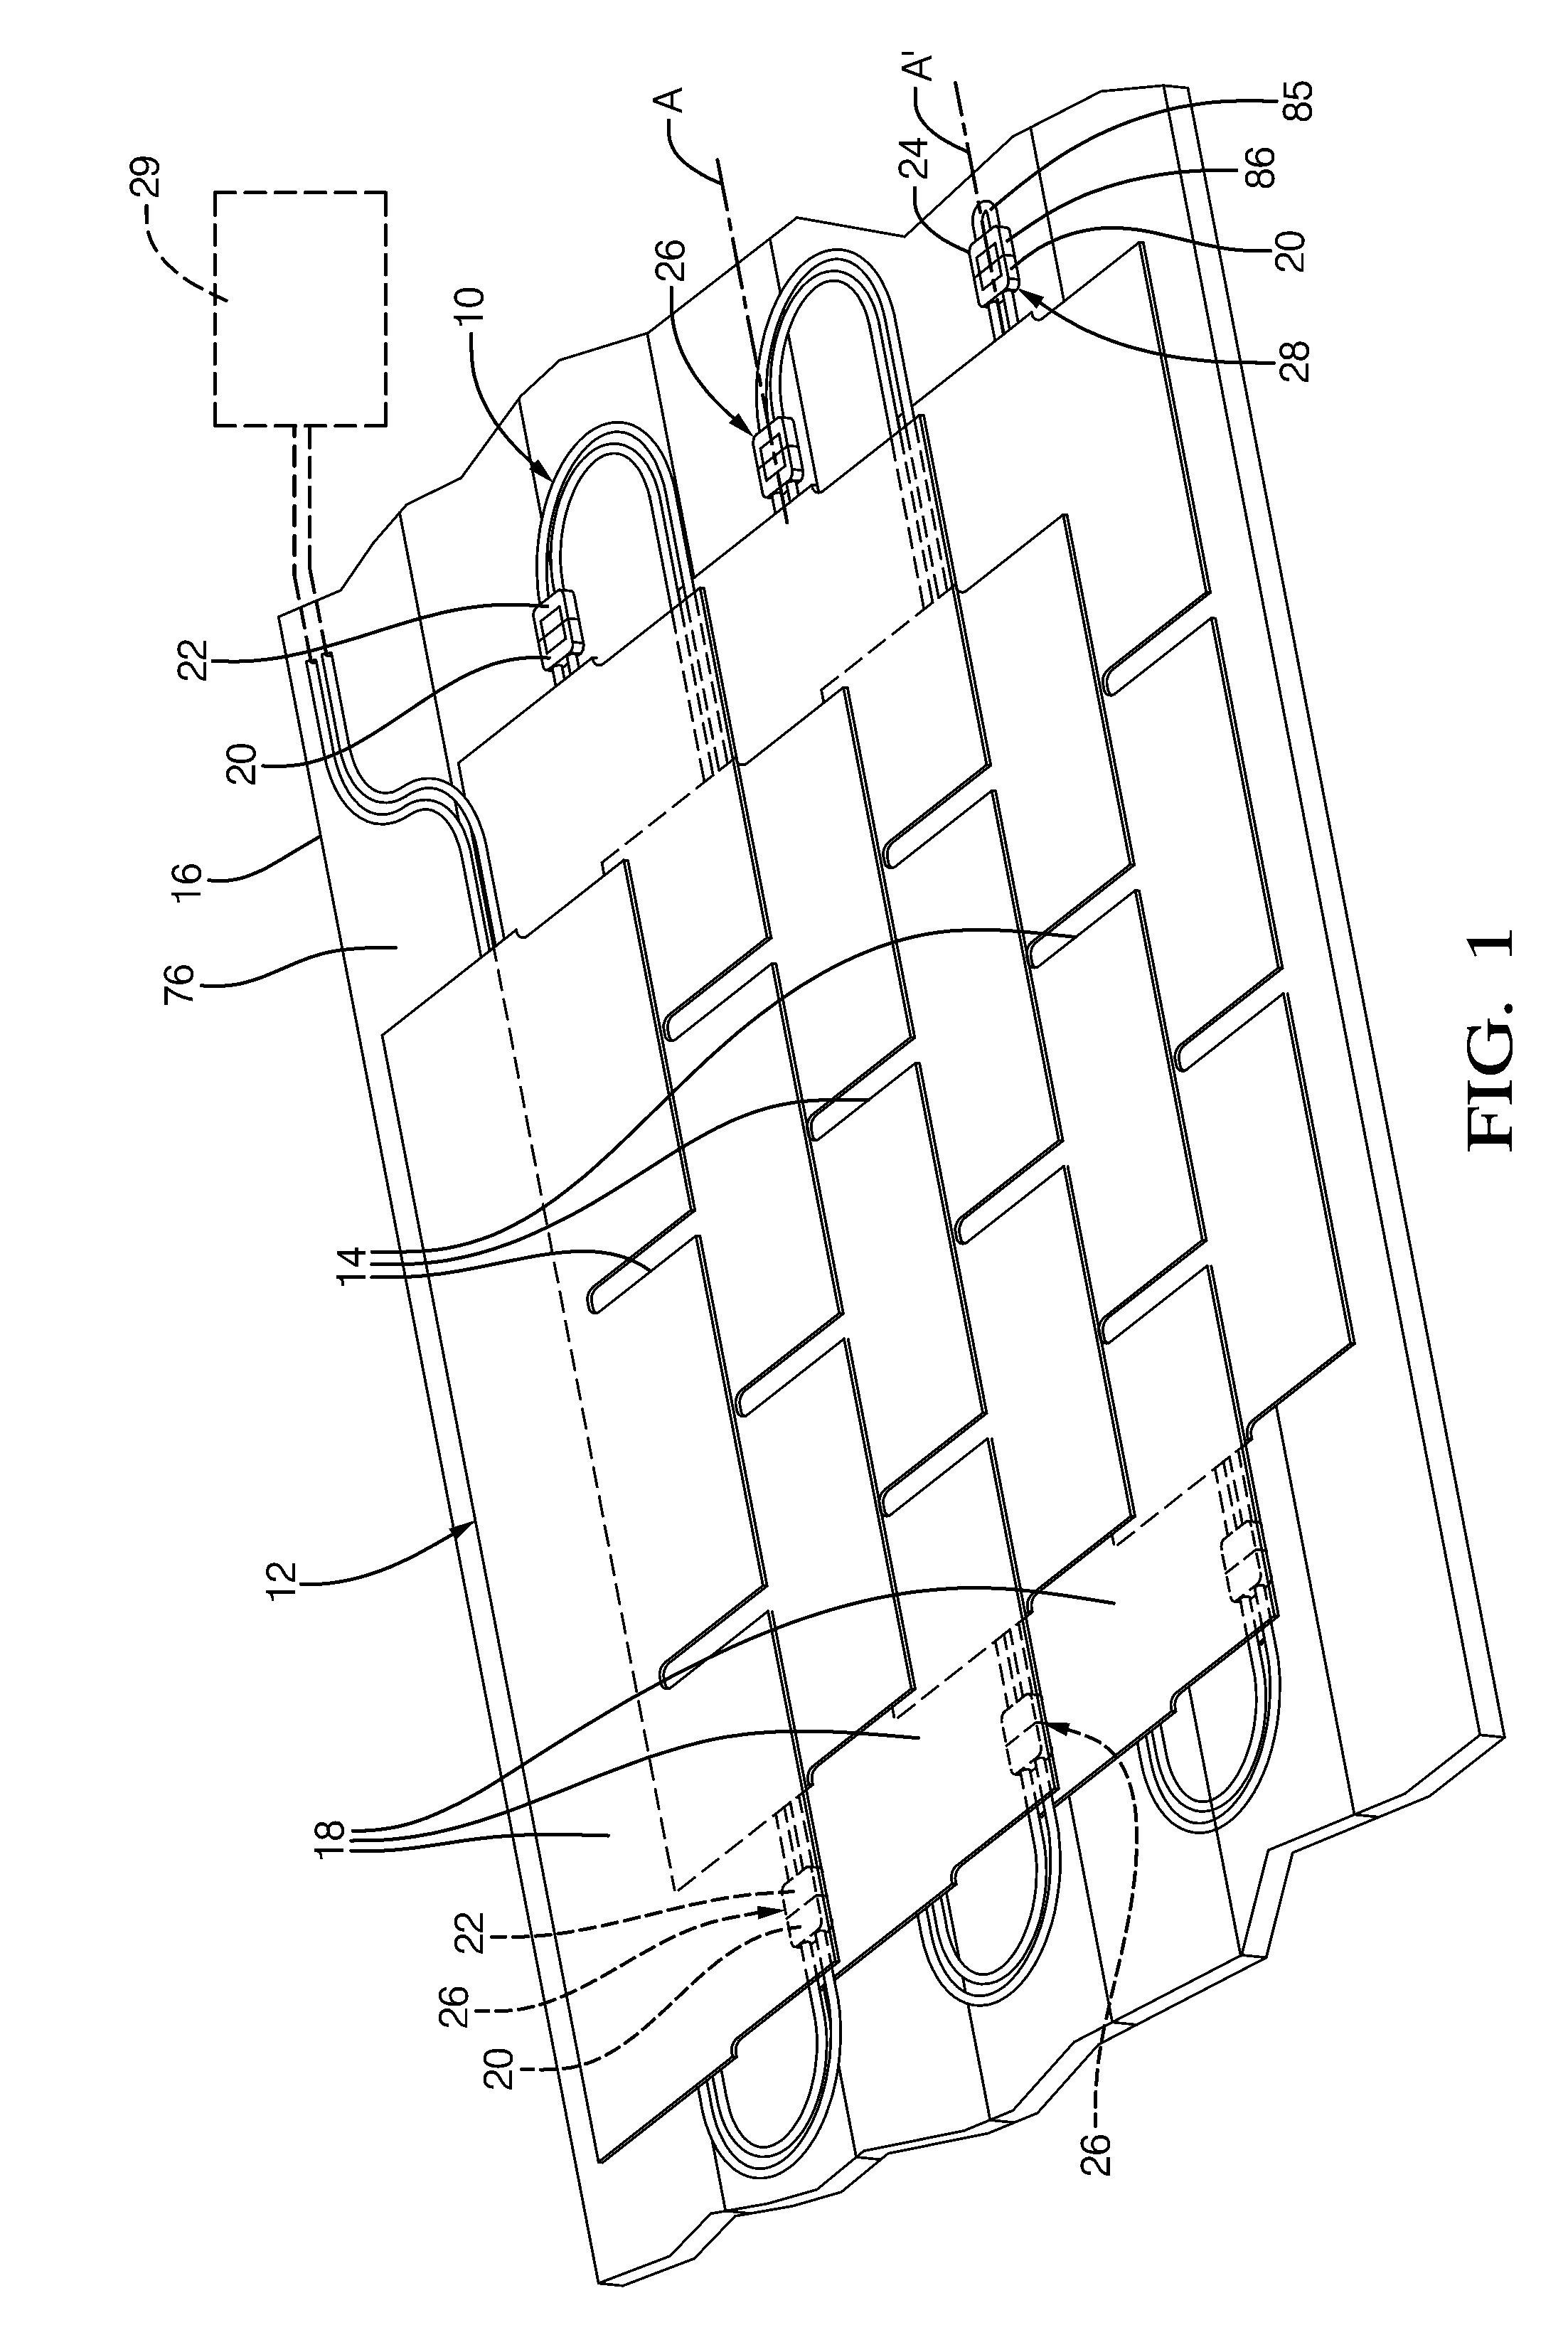 Low profile electrical connection system